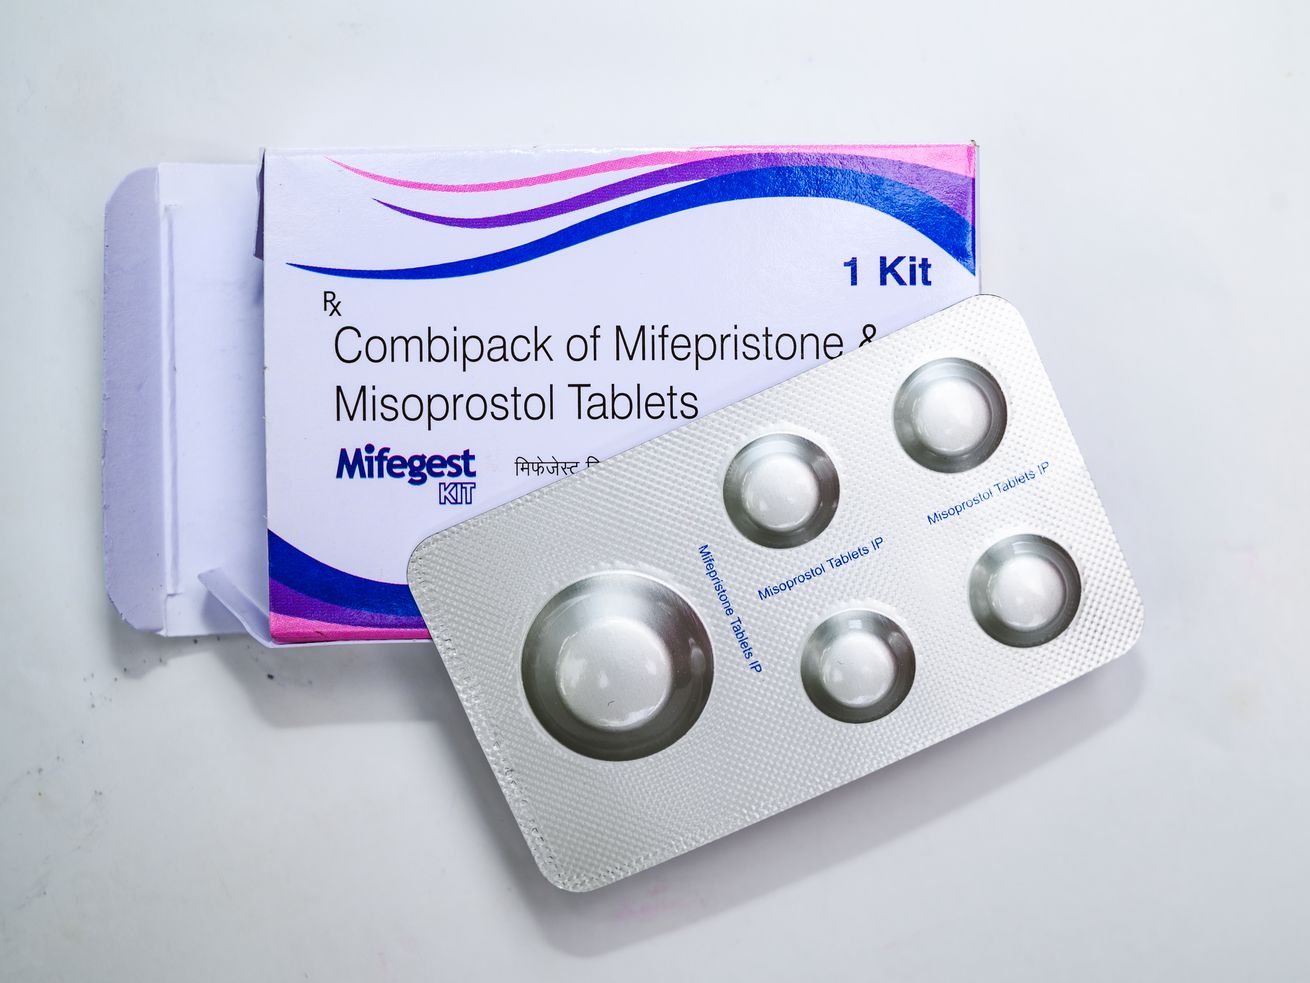 A box of mifepristone pills, with a silver blister pack taken out of the box, at a pharmacy.